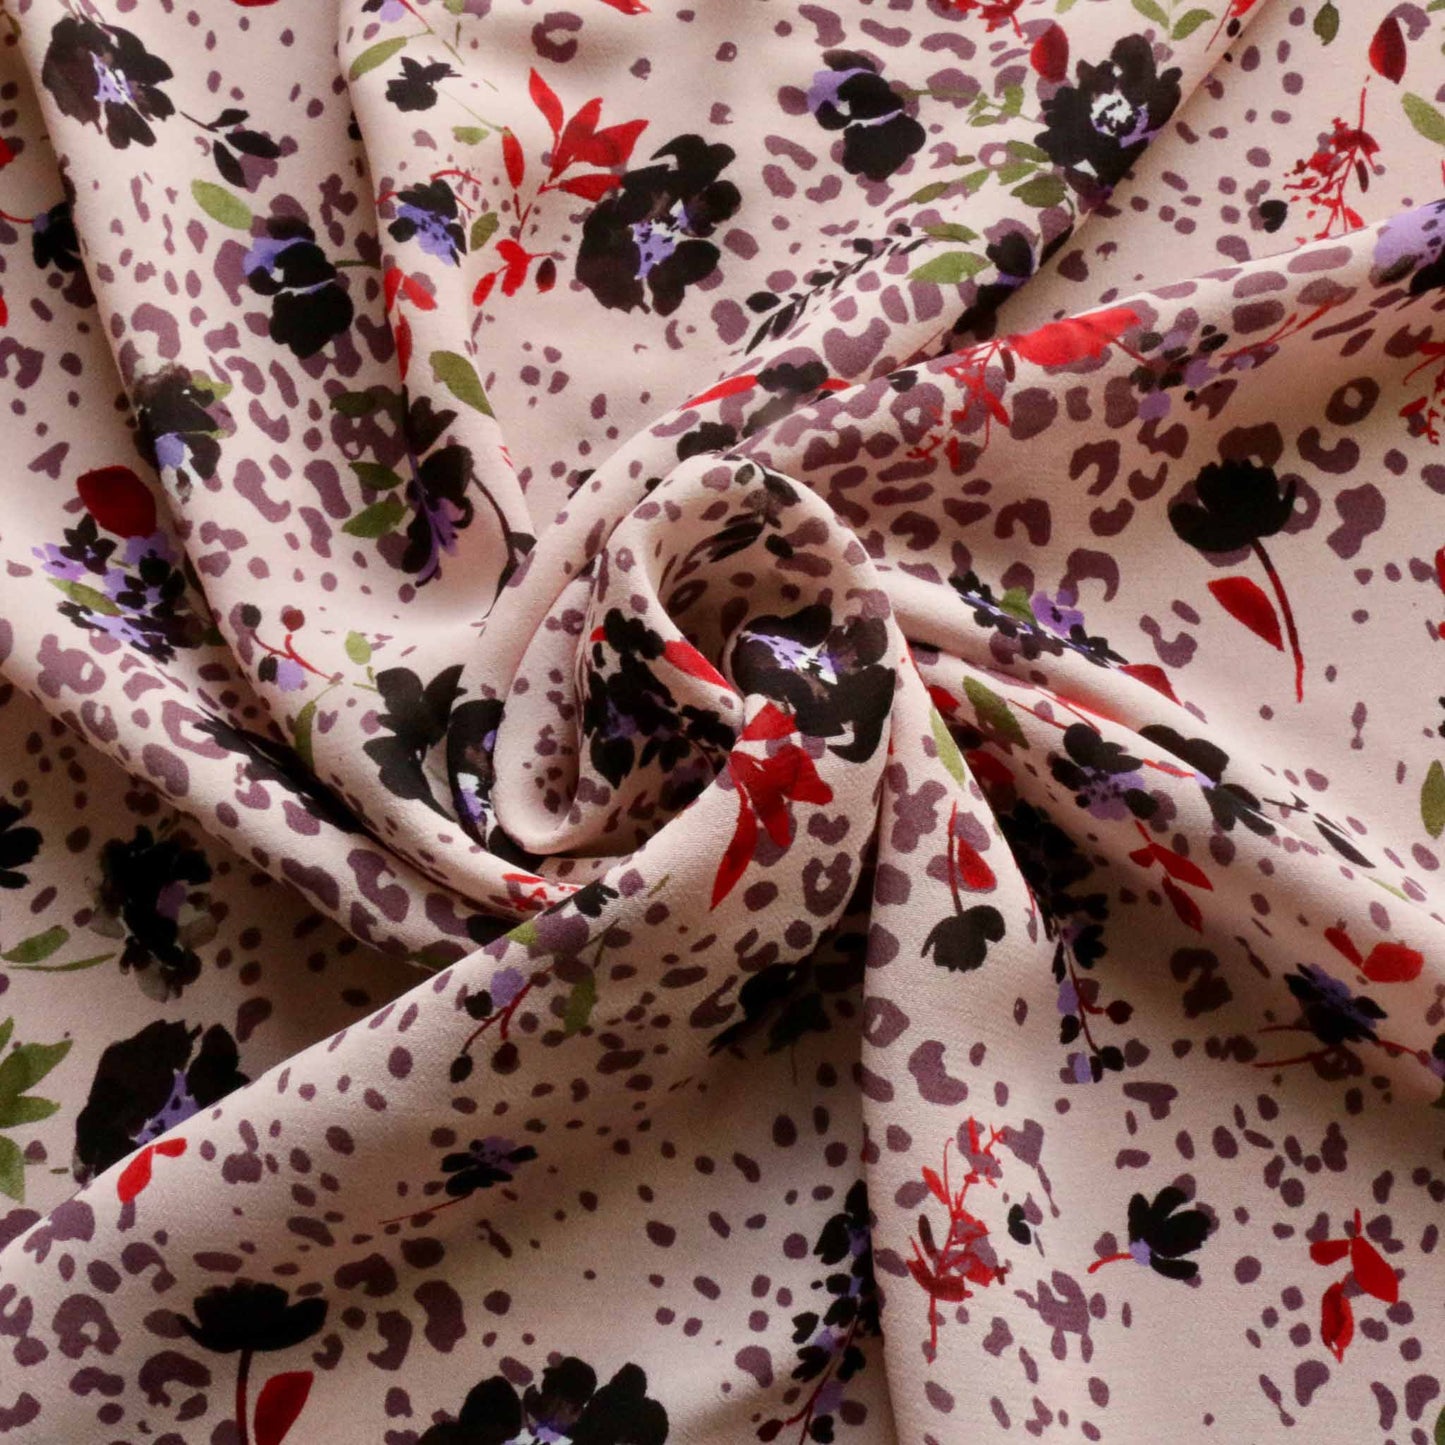 pink chiffon viscose dressmaking fabric with flowers and animal print in black and brown